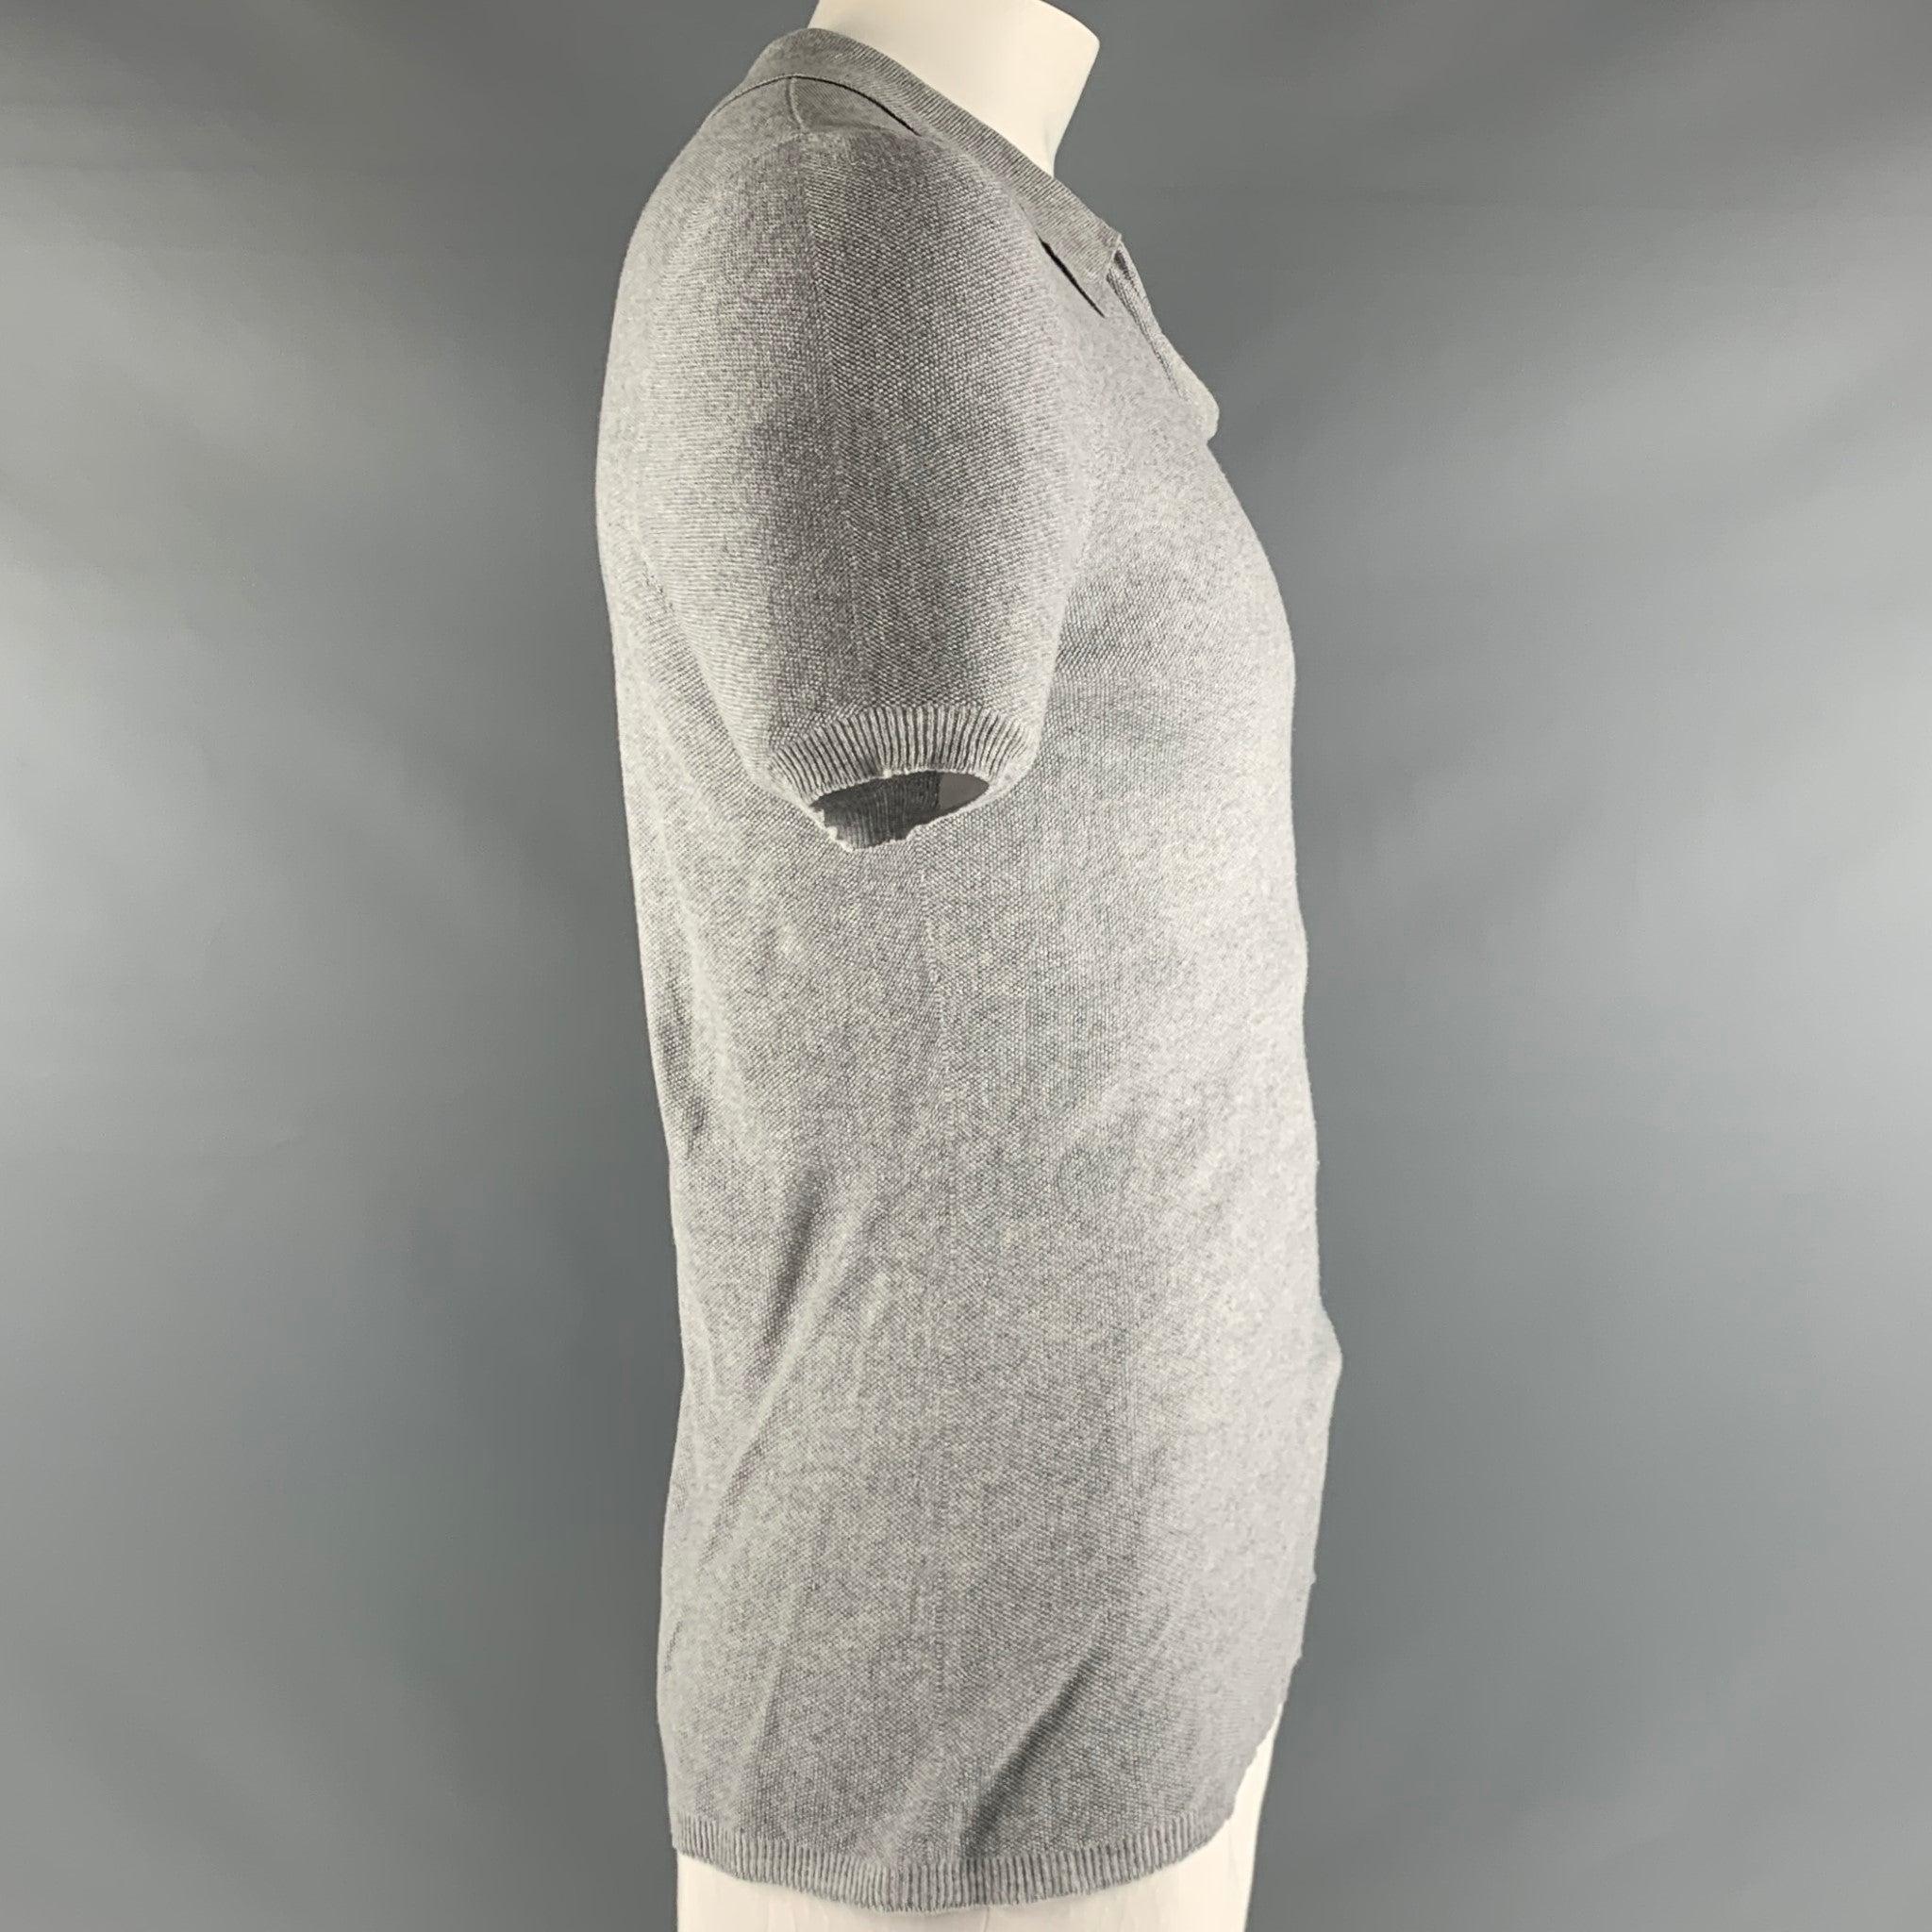 GIORGIO ARMANI top in a grey silk fabric featuring short sleeves and unstructured spread collar. Made in Italy. Excellent Pre-Owned Condition. 

Marked:   IT 48 

Measurements: 
 
Shoulder: 17.5 inches  Chest: 40 inches  Sleeve: 10 inches  Length: